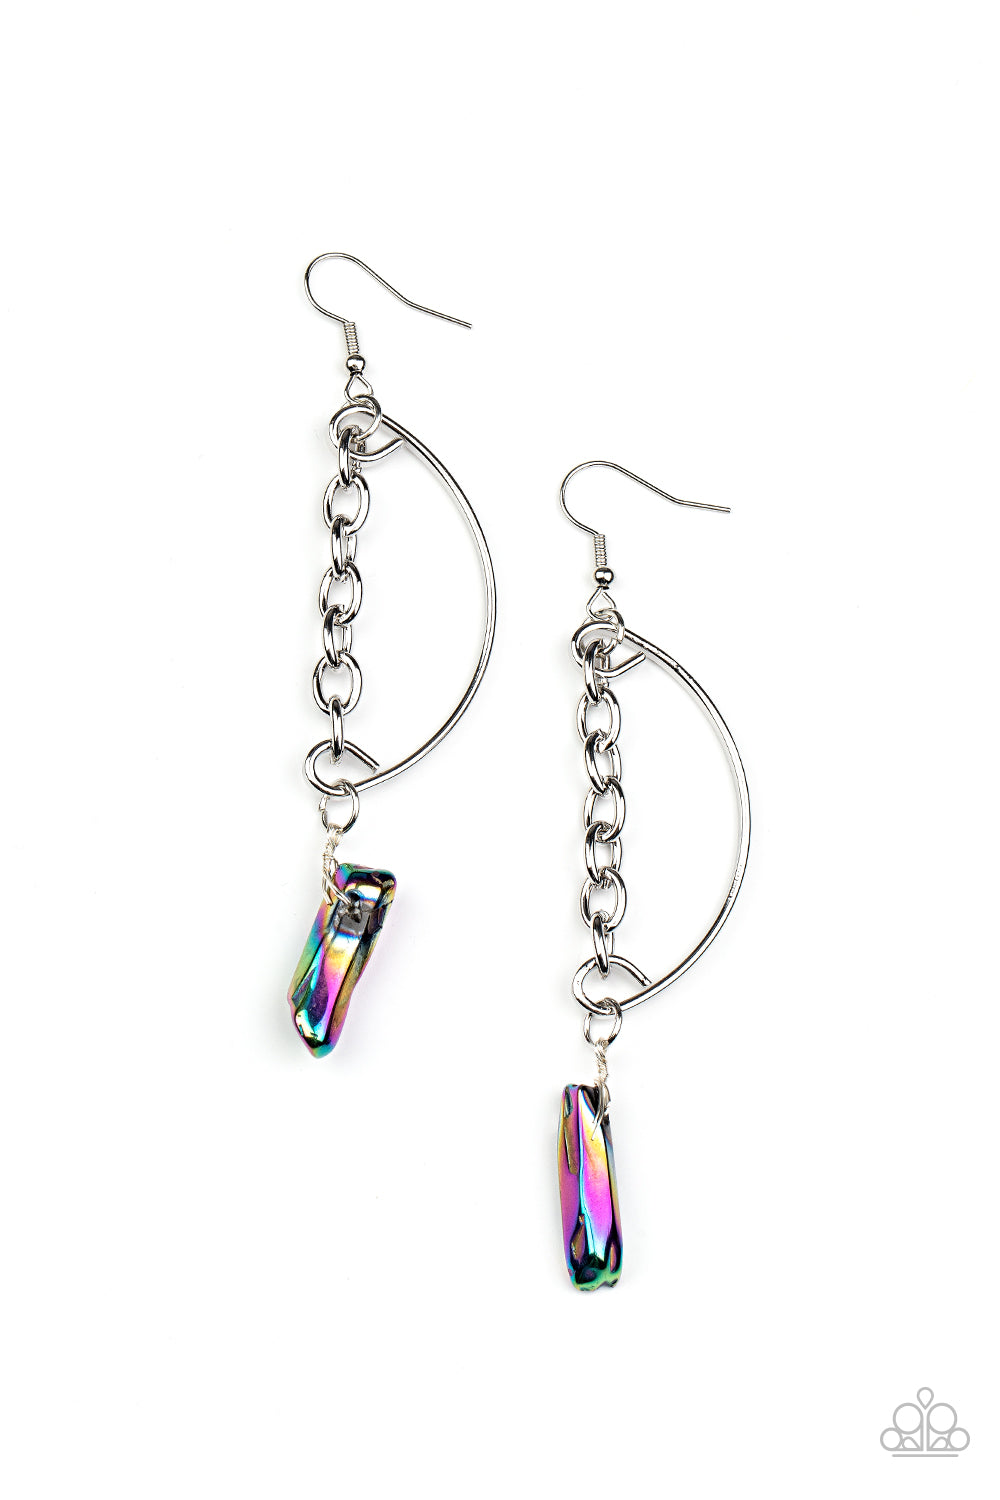 Featuring an oil spill finish, a raw rock-like bead swings from the bottom of a solitaire silver chain that attaches to a bowing silver bar for an edgy look. Earring attaches to a standard fishhook fitting. As the stone elements in this piece are natural, some color variation is normal